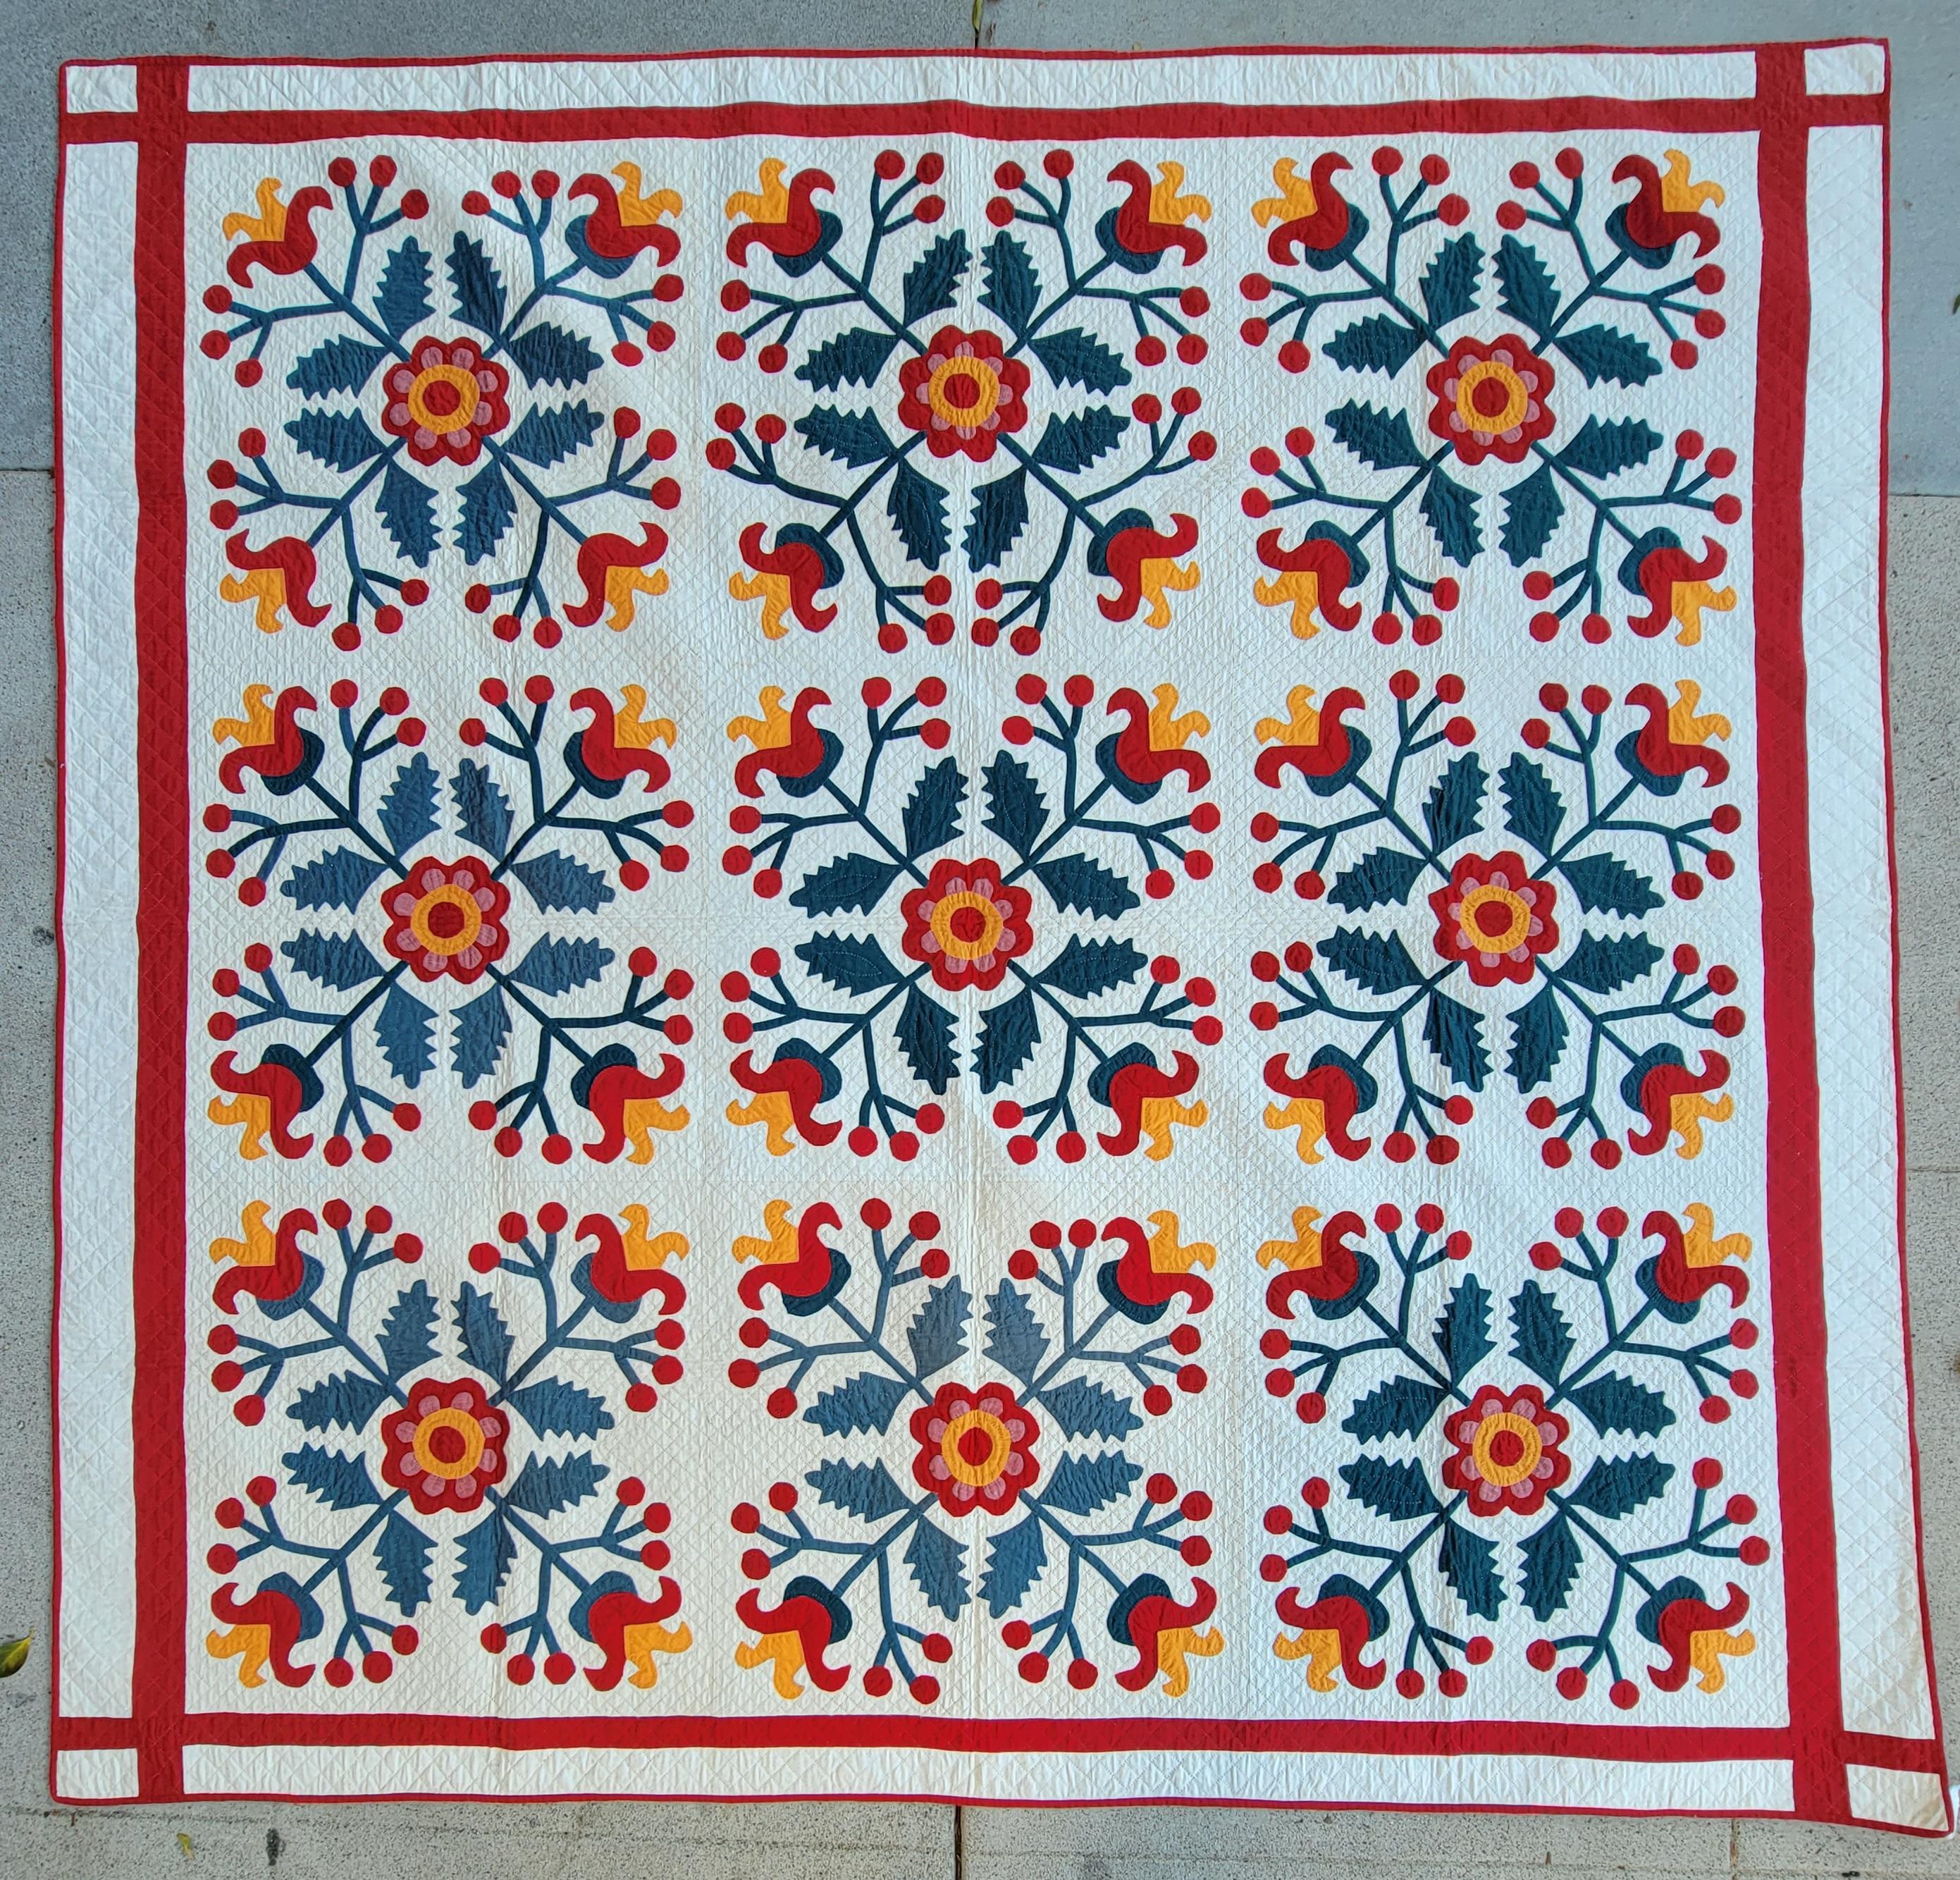 This fine folky tulip Dutchy applique quilt is in pristine condition and was found 
in Pennsylvania. This quilt comes from a private collection in Lewisburg,Pennsylvania. The most unusual form and pattern.